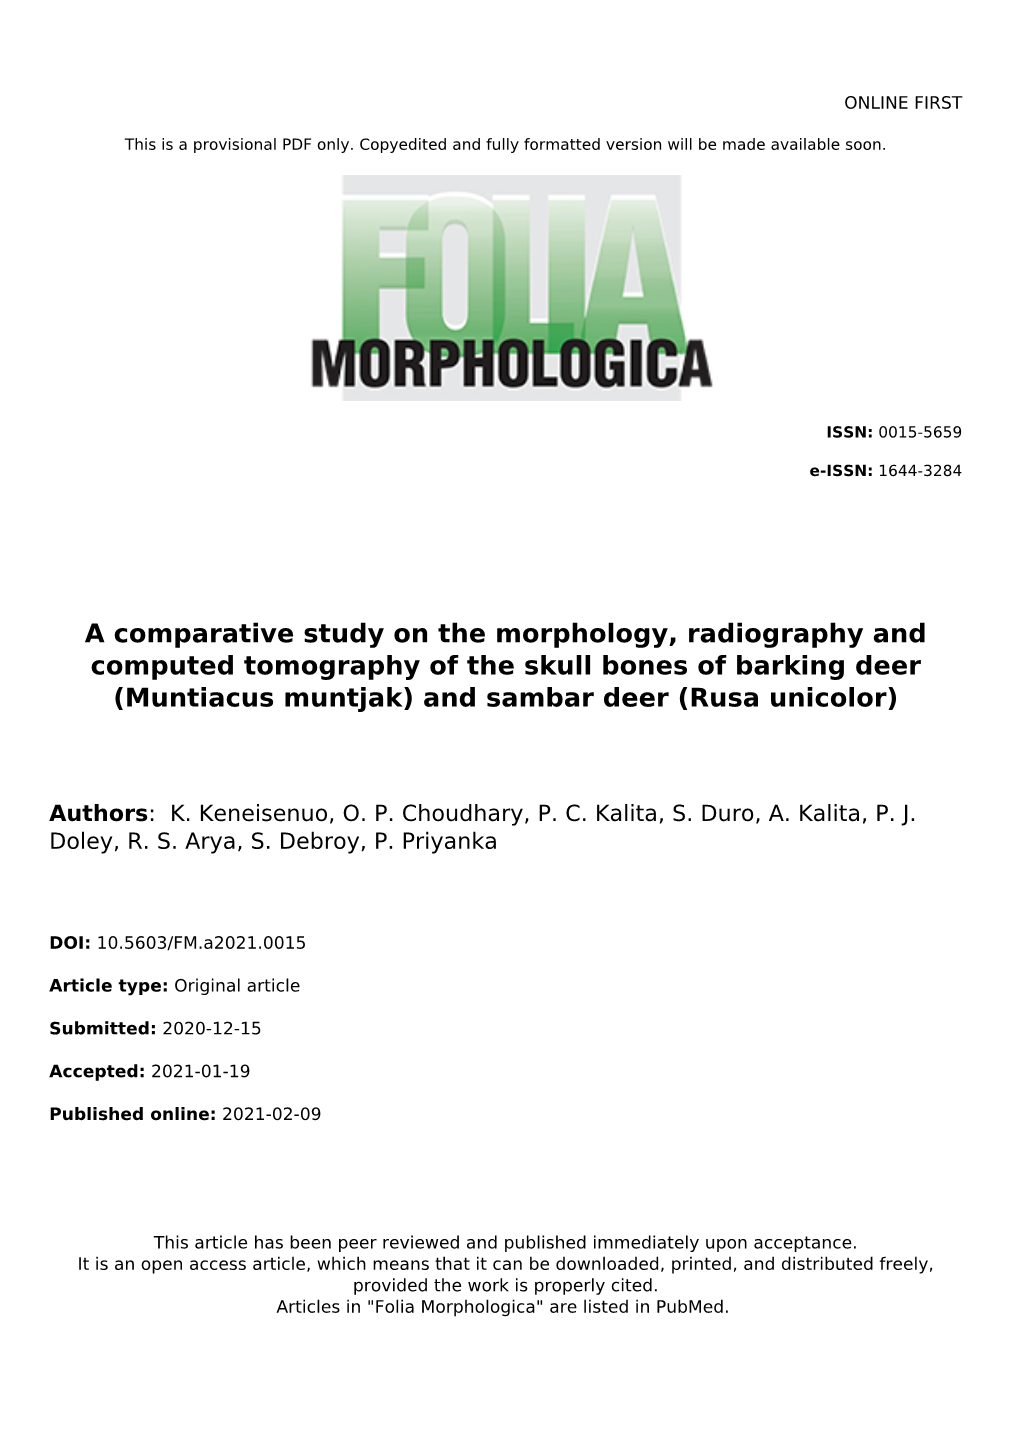 A Comparative Study on the Morphology, Radiography and Computed Tomography of the Skull Bones of Barking Deer (Muntiacus Muntjak) and Sambar Deer (Rusa Unicolor)